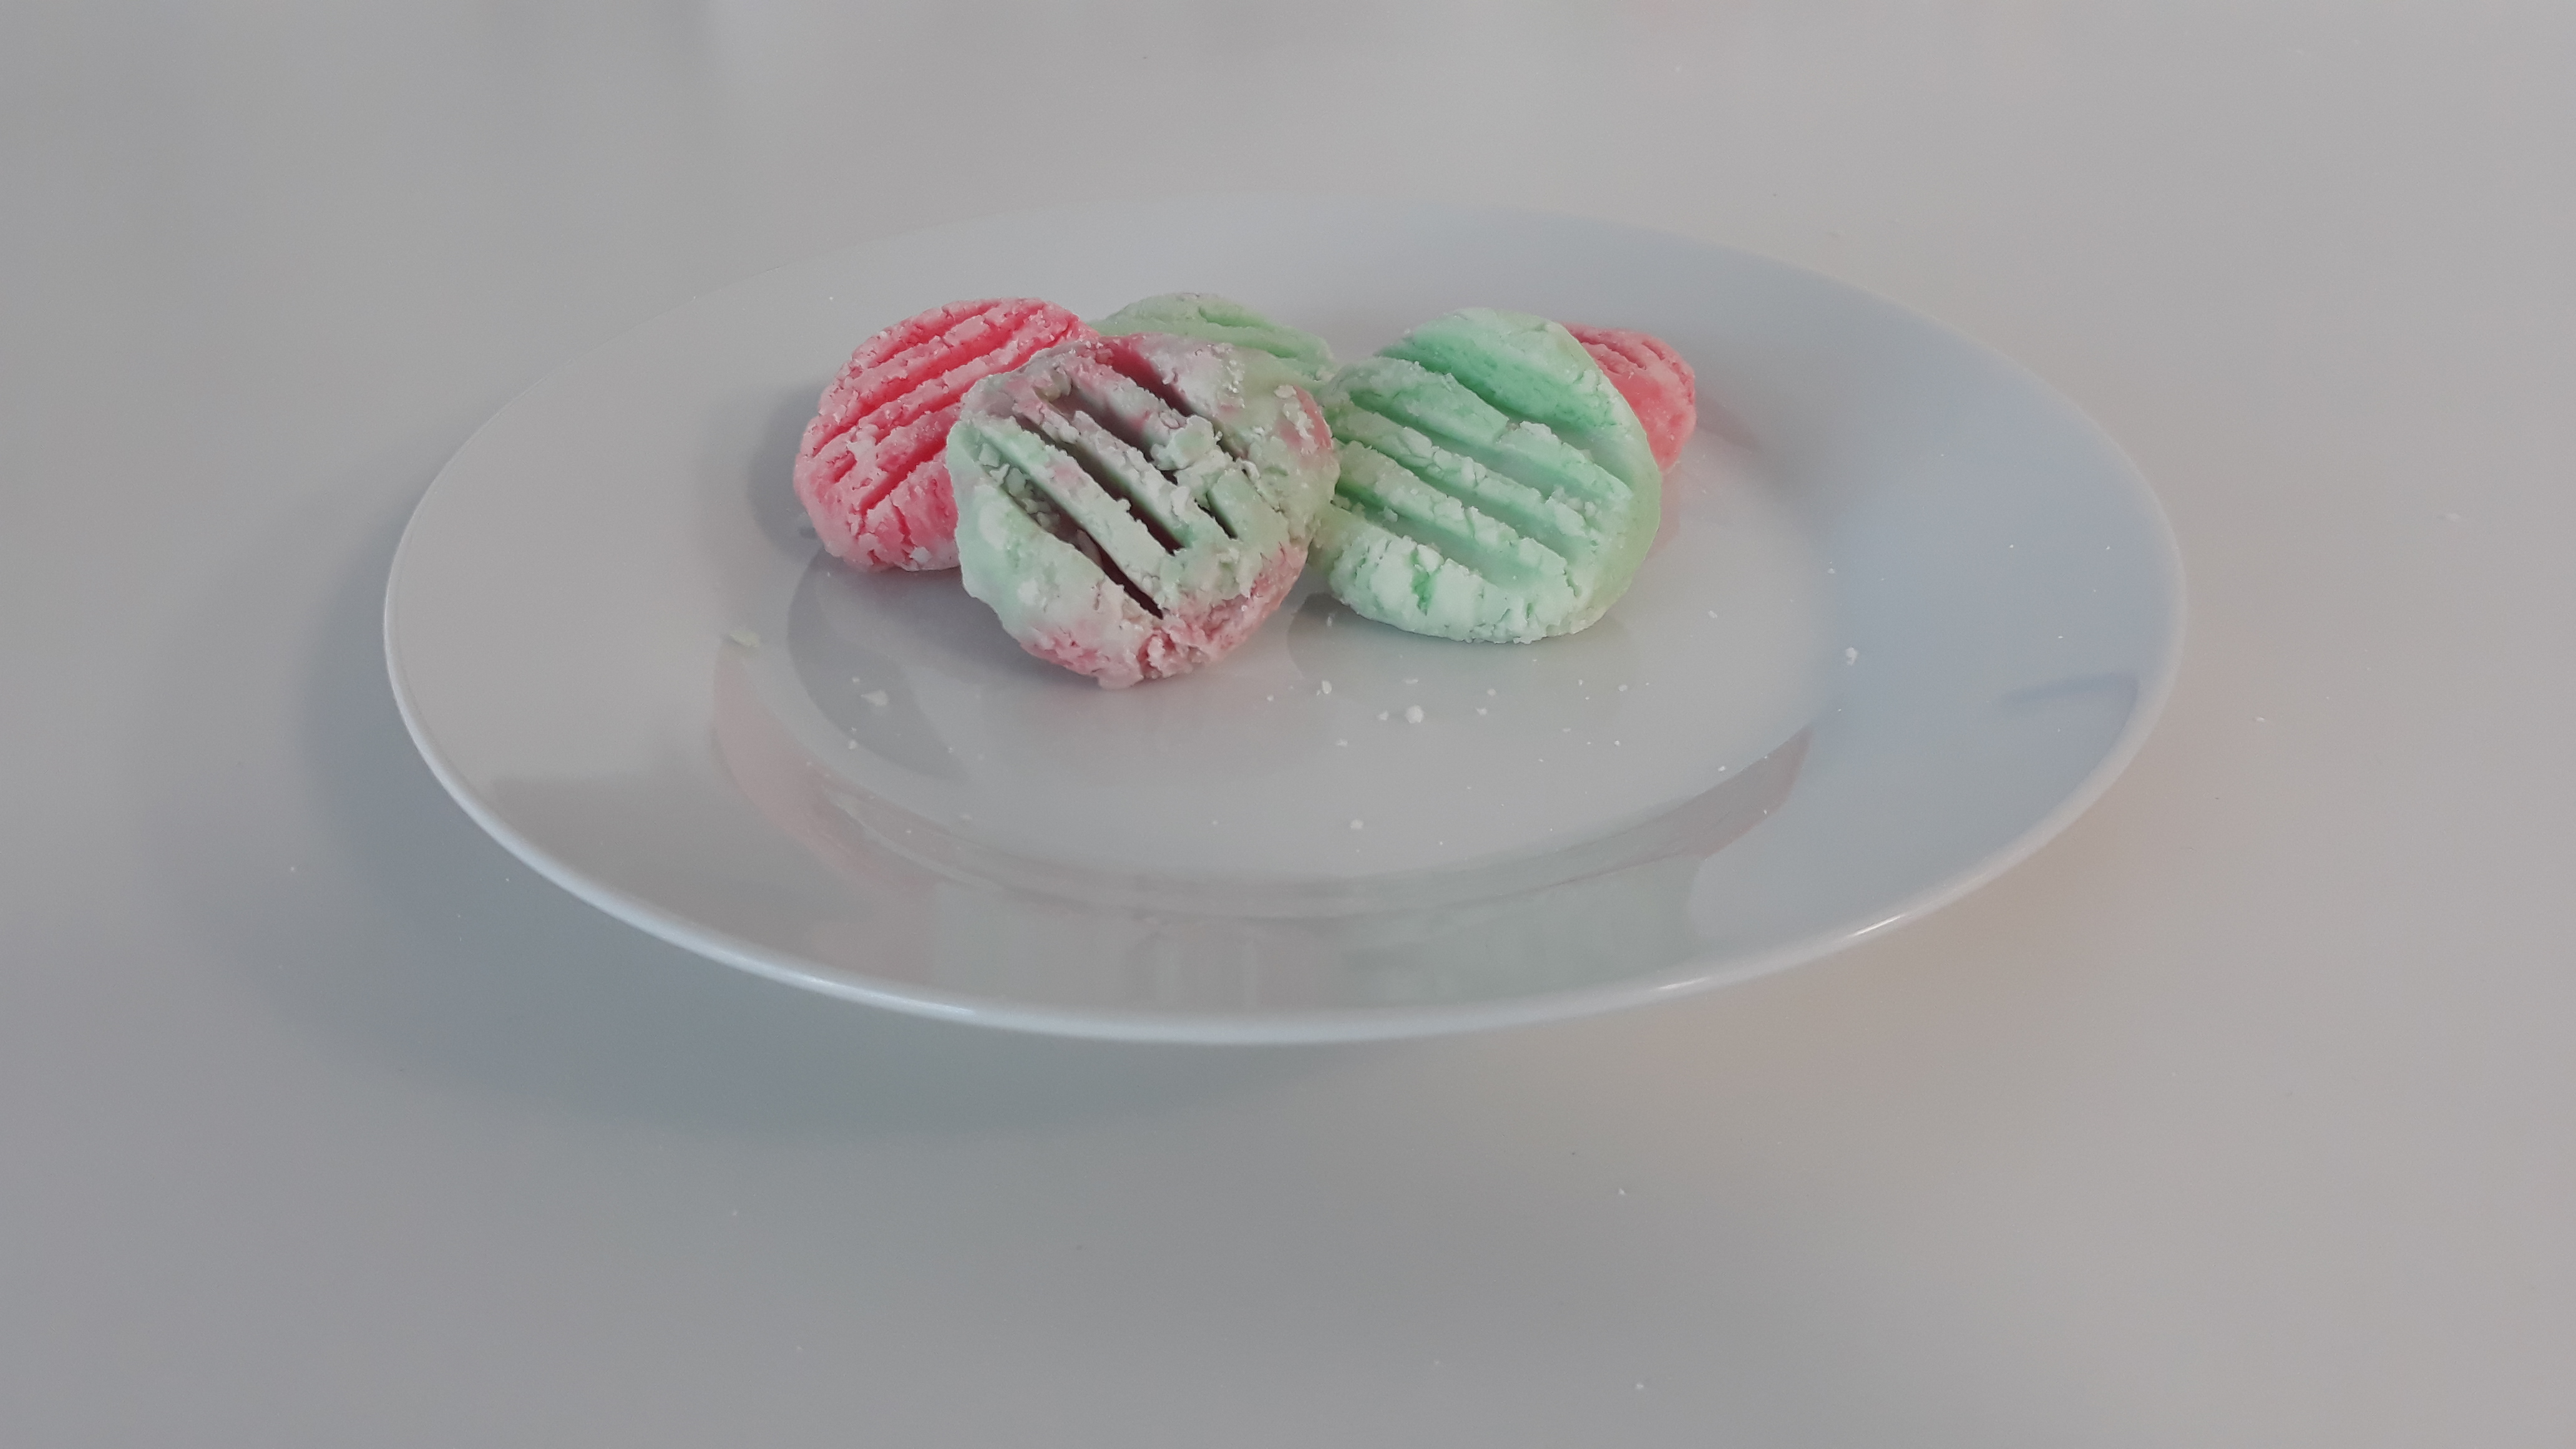 Red and green mints arranged on a white plate